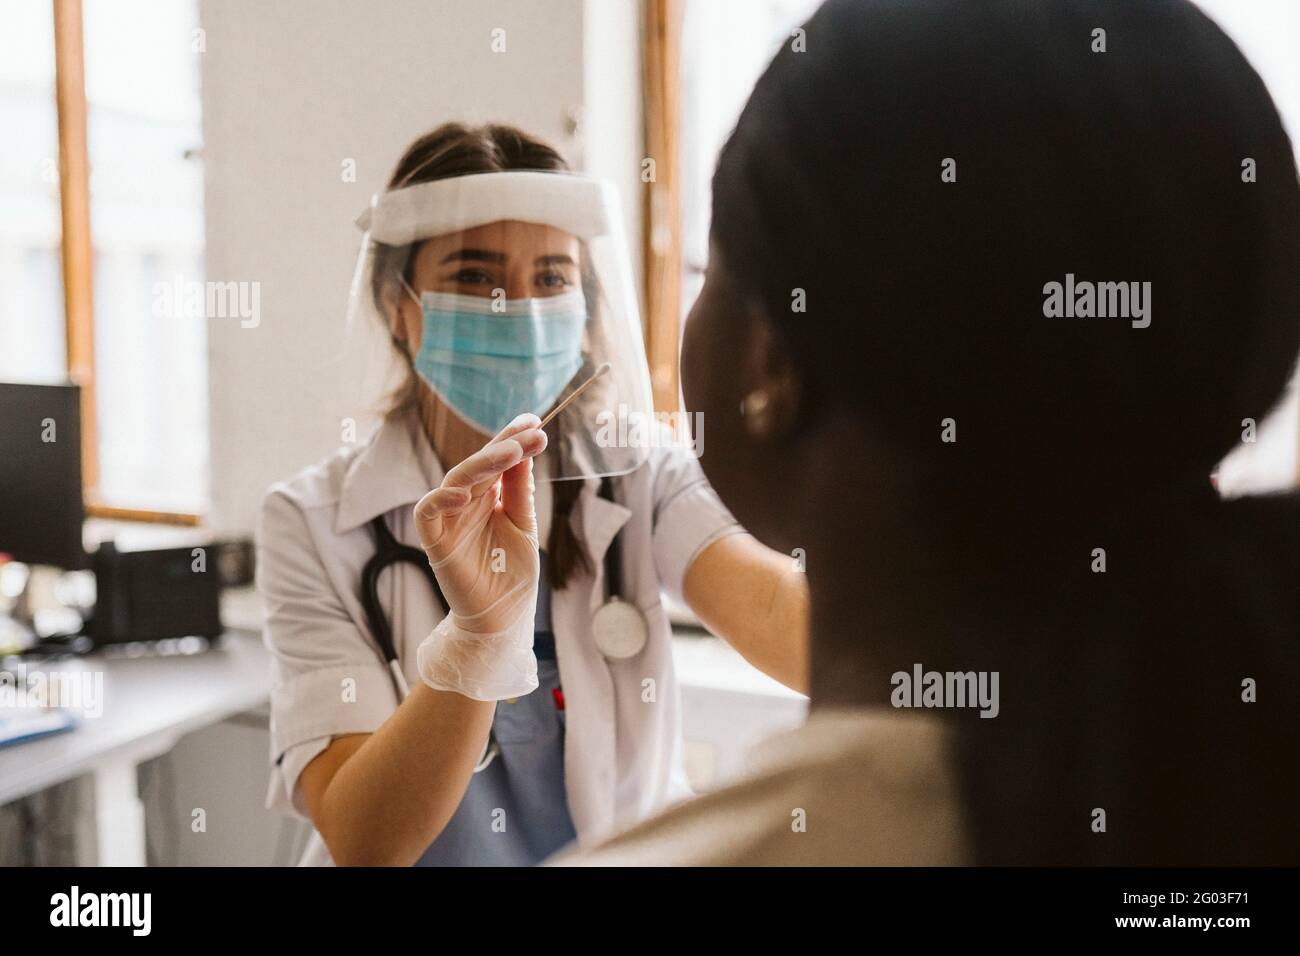 Female medical expert doing patient's medical test during COVID-19 Stock Photo